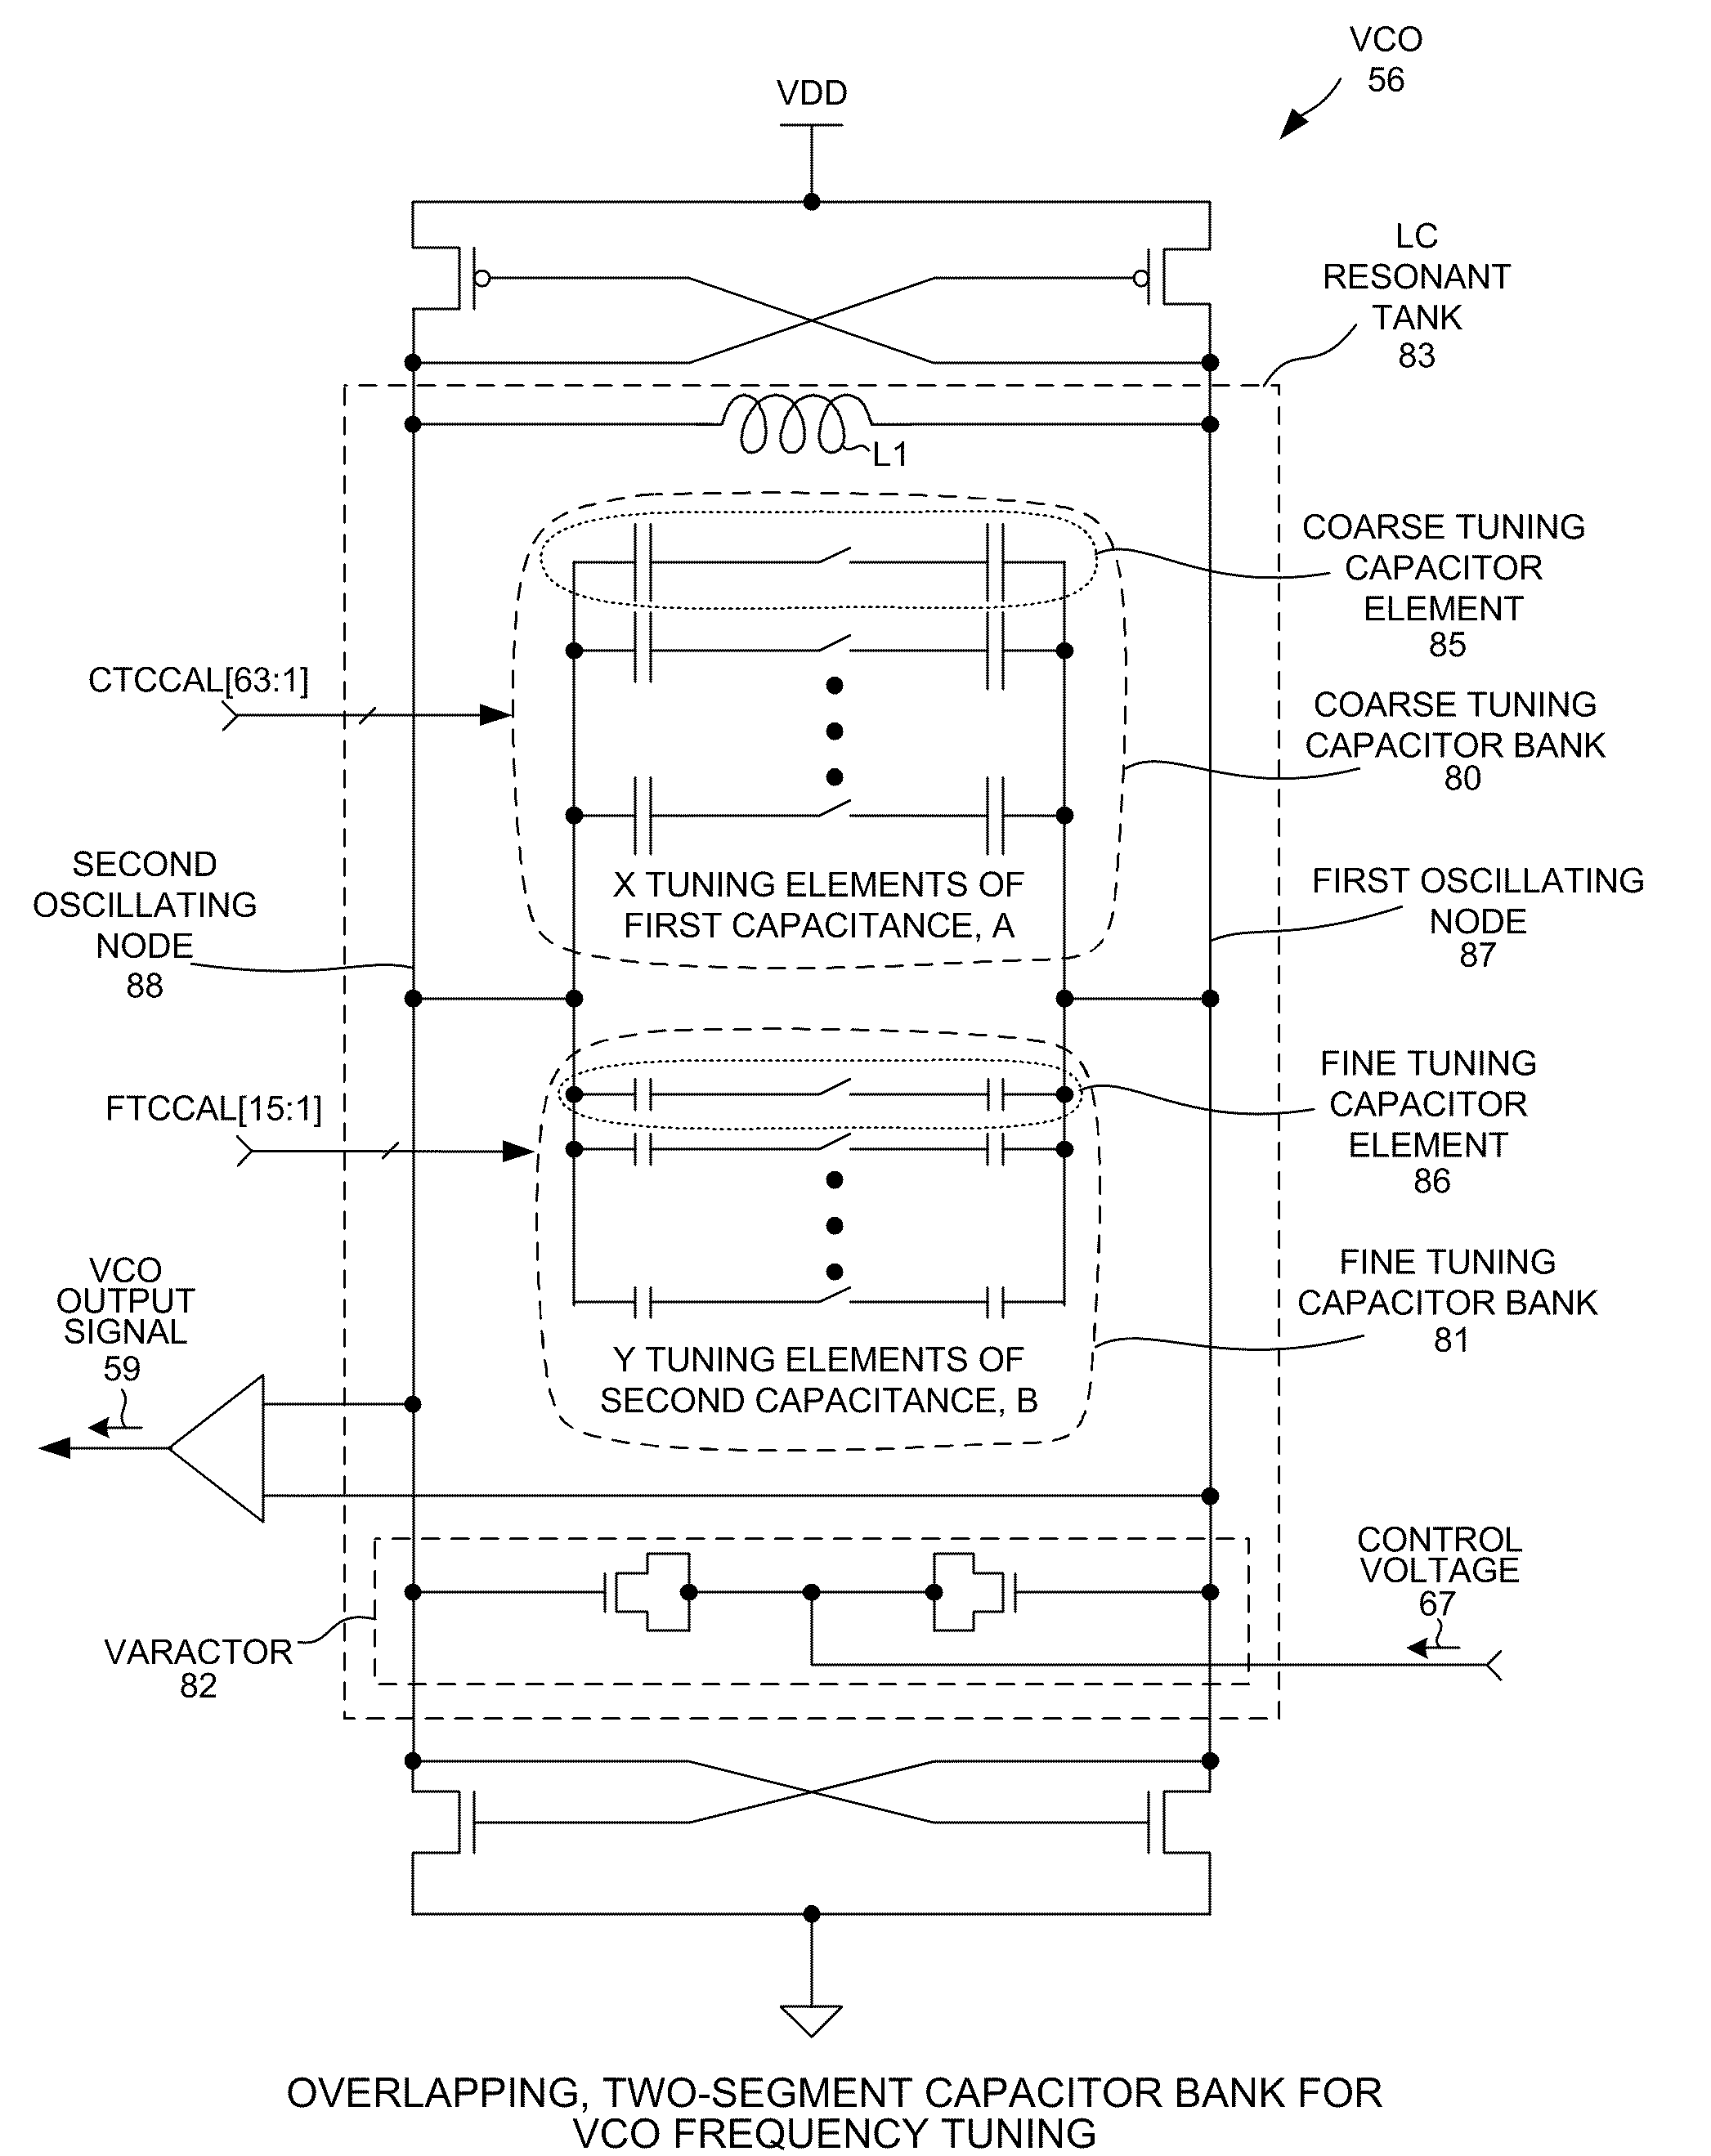 Overlapping, two-segment capacitor bank for vco frequency tuning